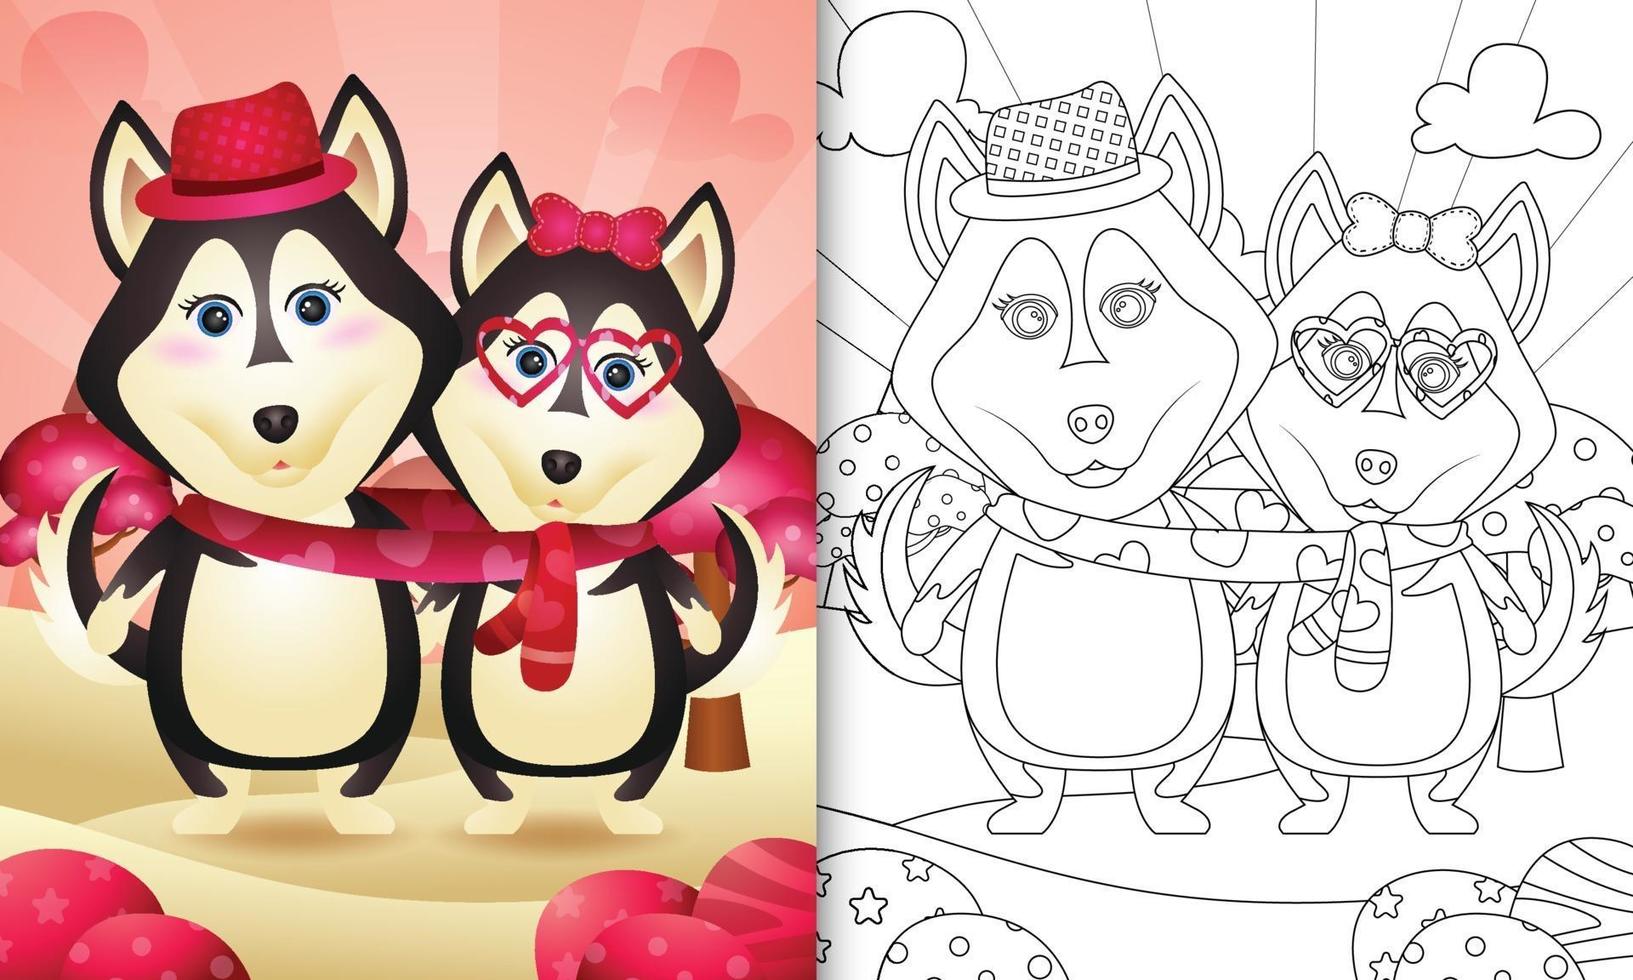 coloring book for kids with Cute valentine's day husky dog couple illustrated vector